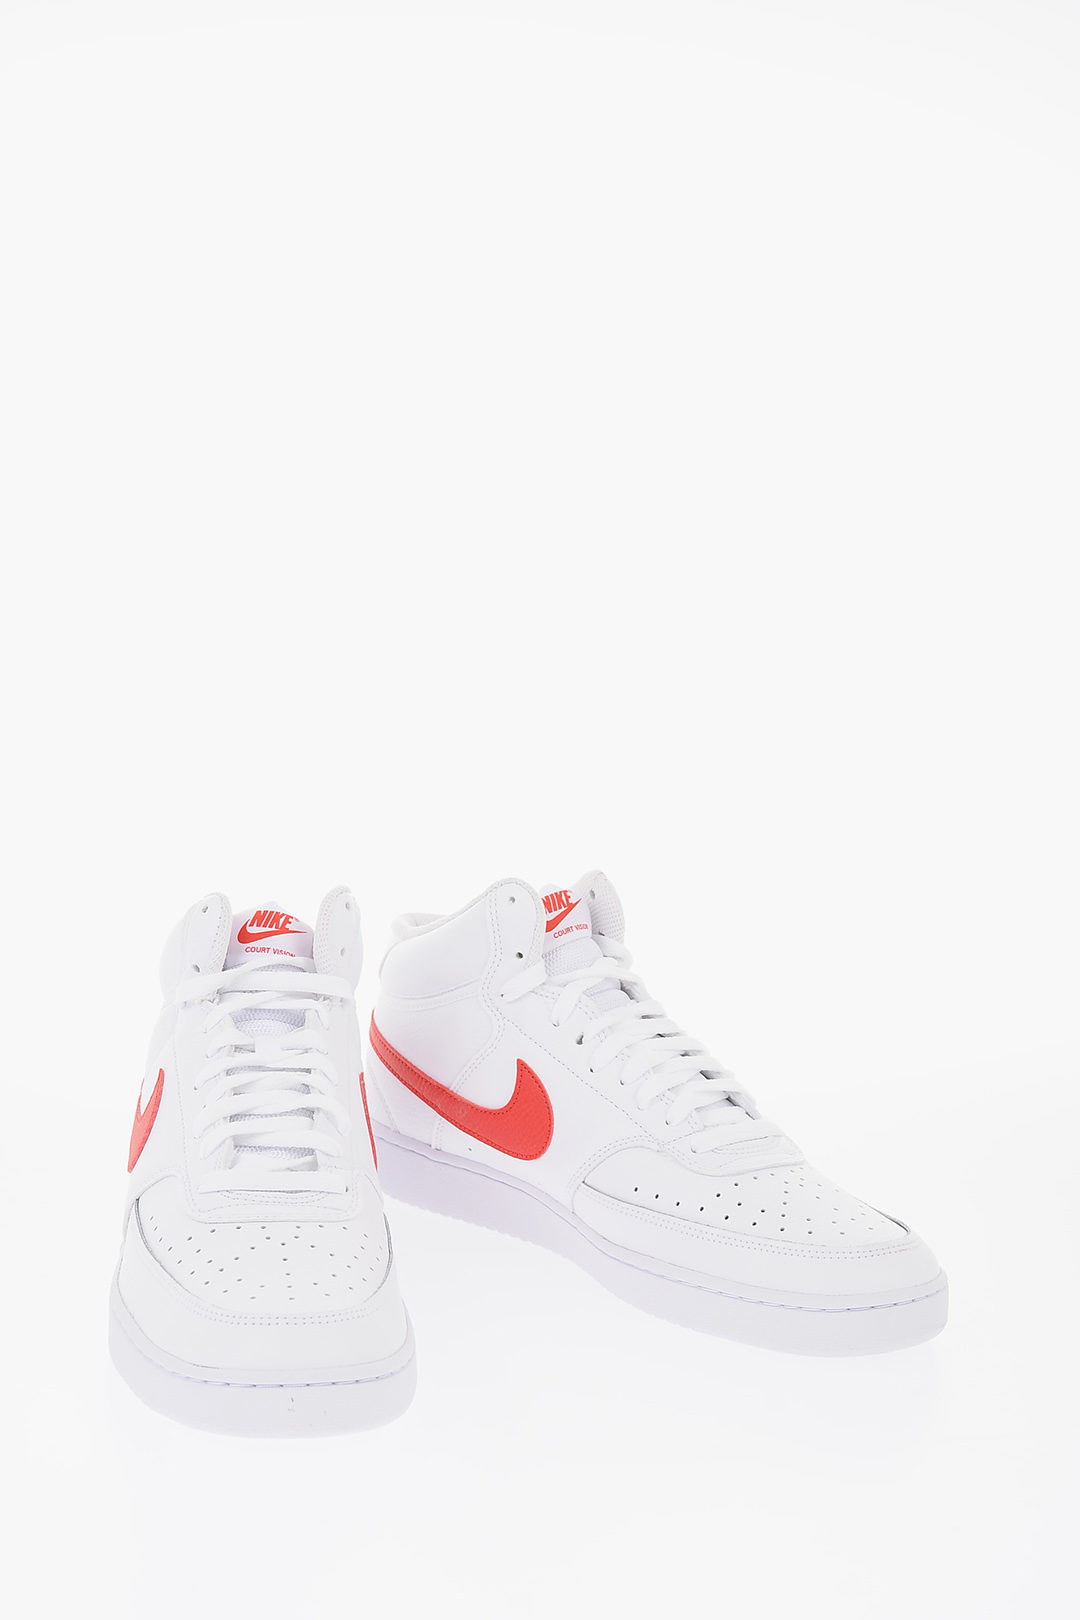 men's leather nike sneakers on sale